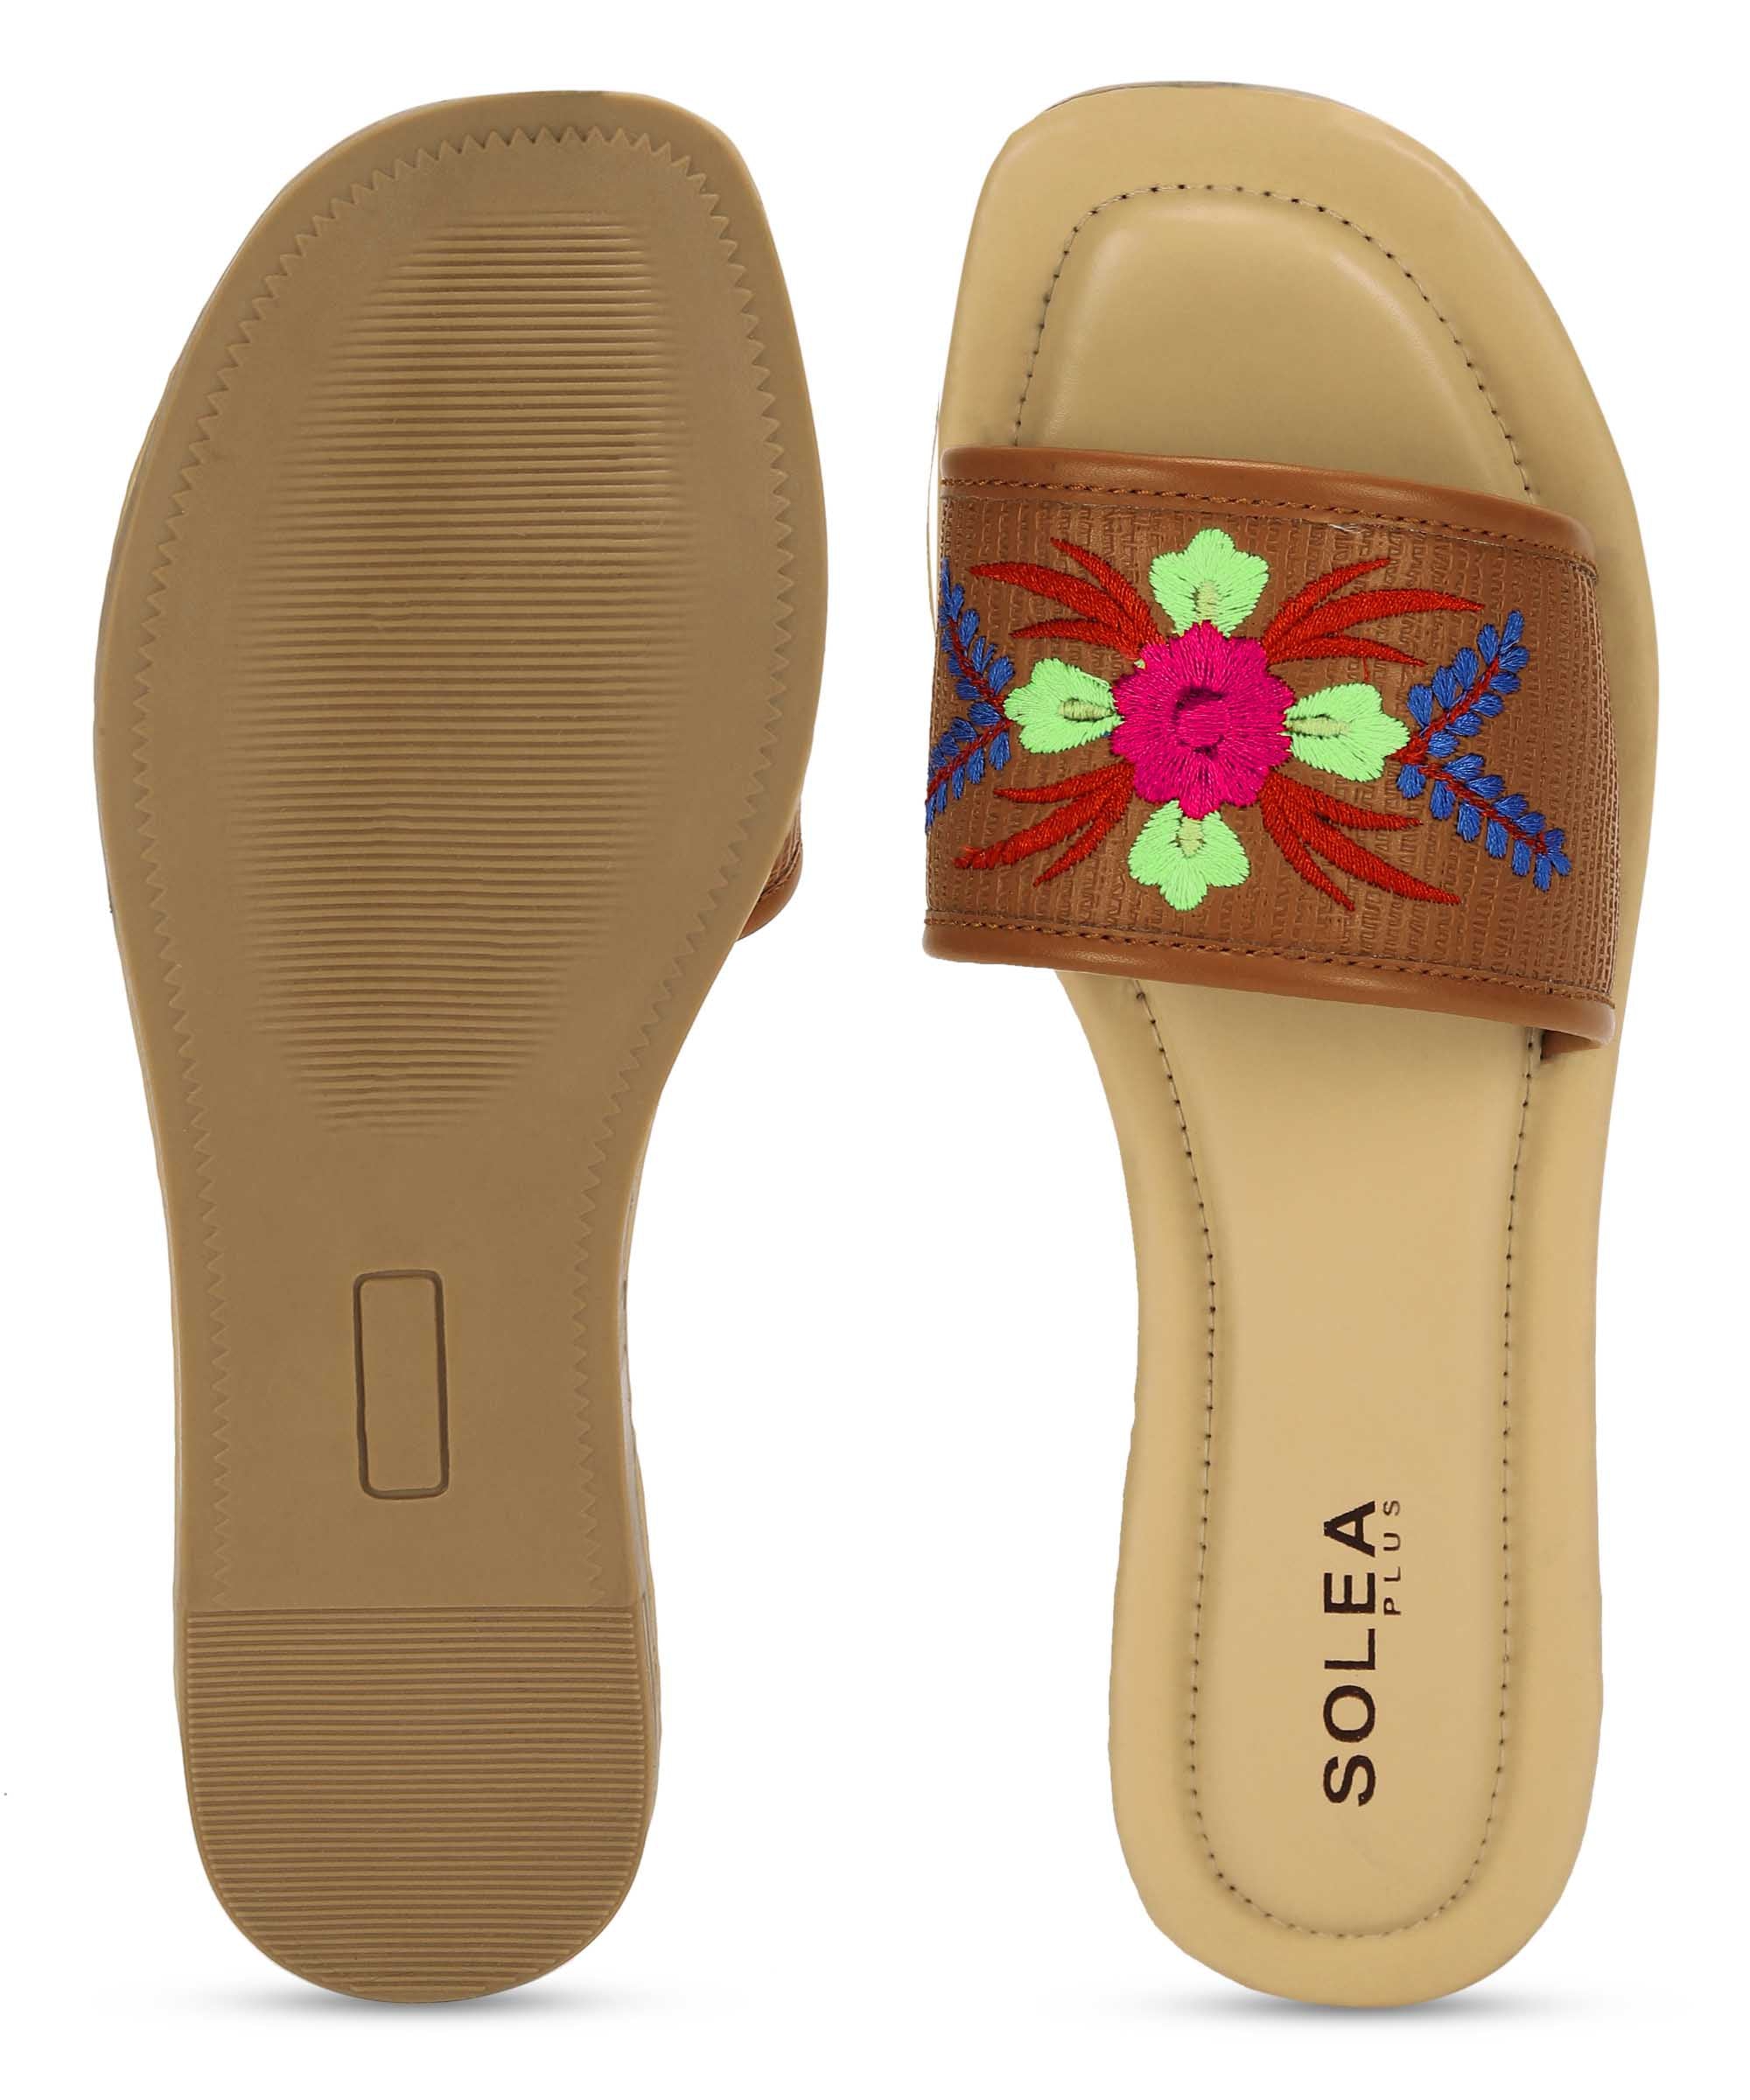 Paragon K6020L Women Sandals | Casual &amp; Formal Sandals | Stylish, Comfortable &amp; Durable | For Daily &amp; Occasion Wear